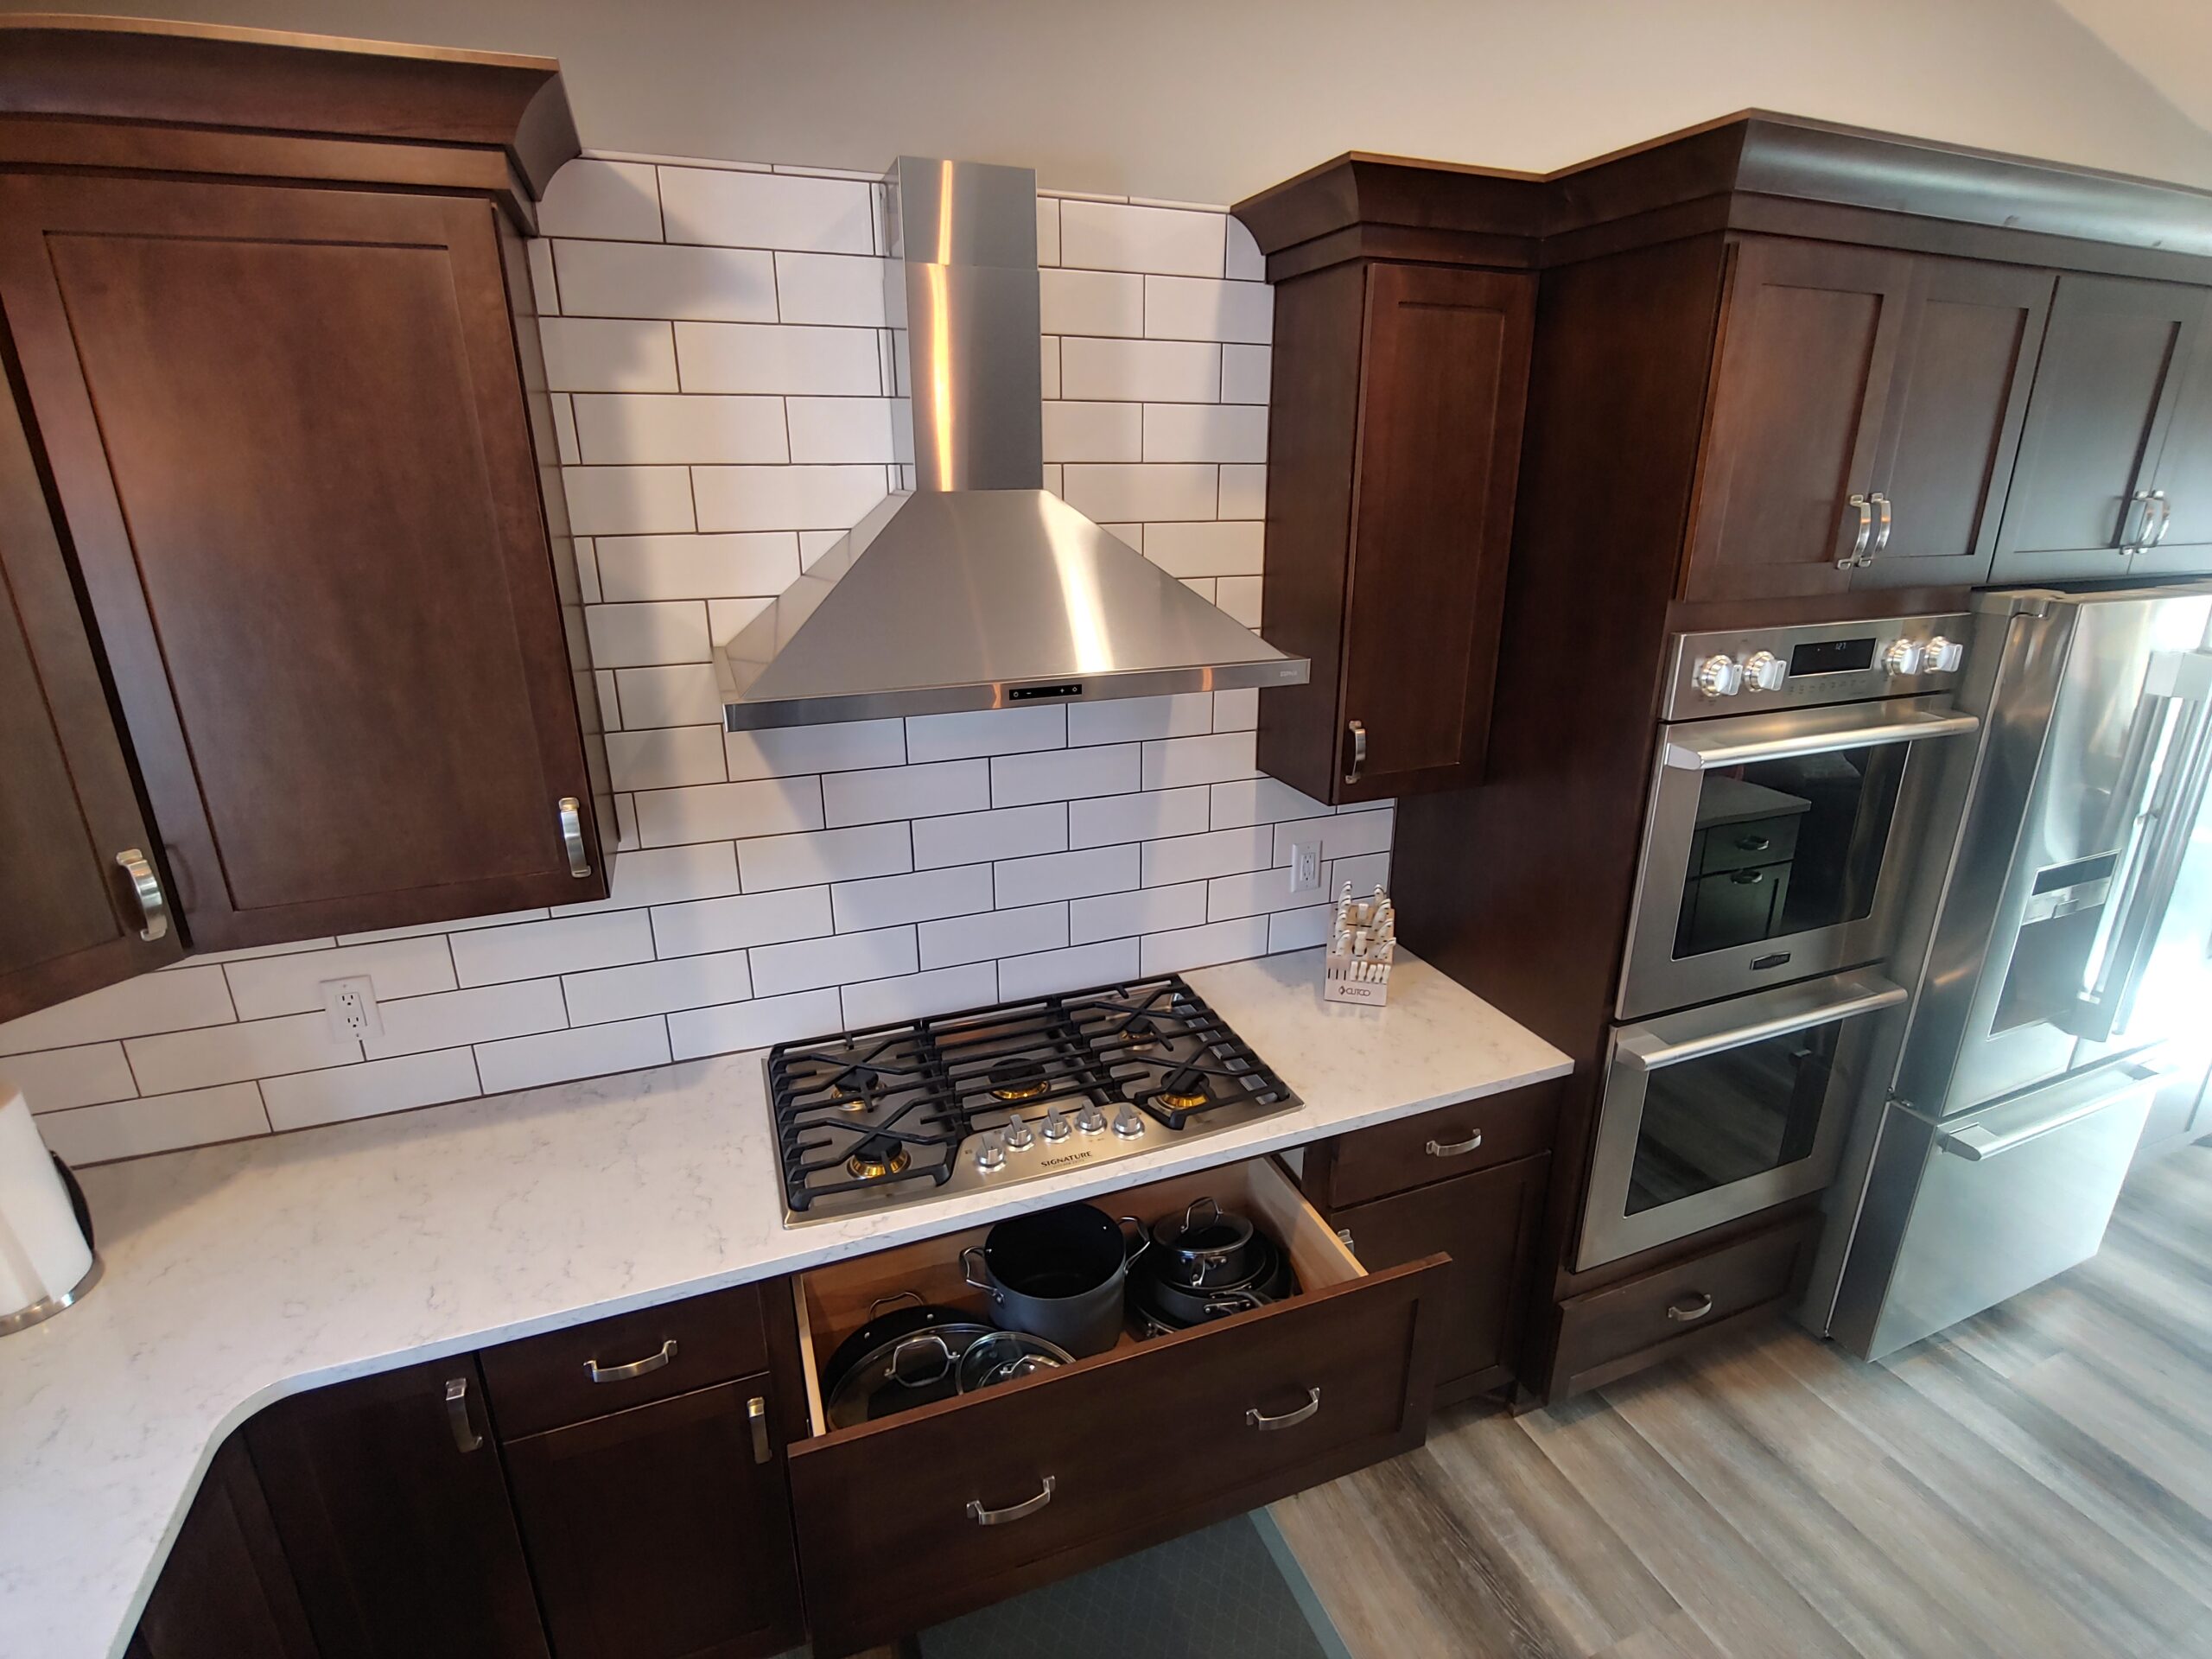 start a kitchen remodeling project today!